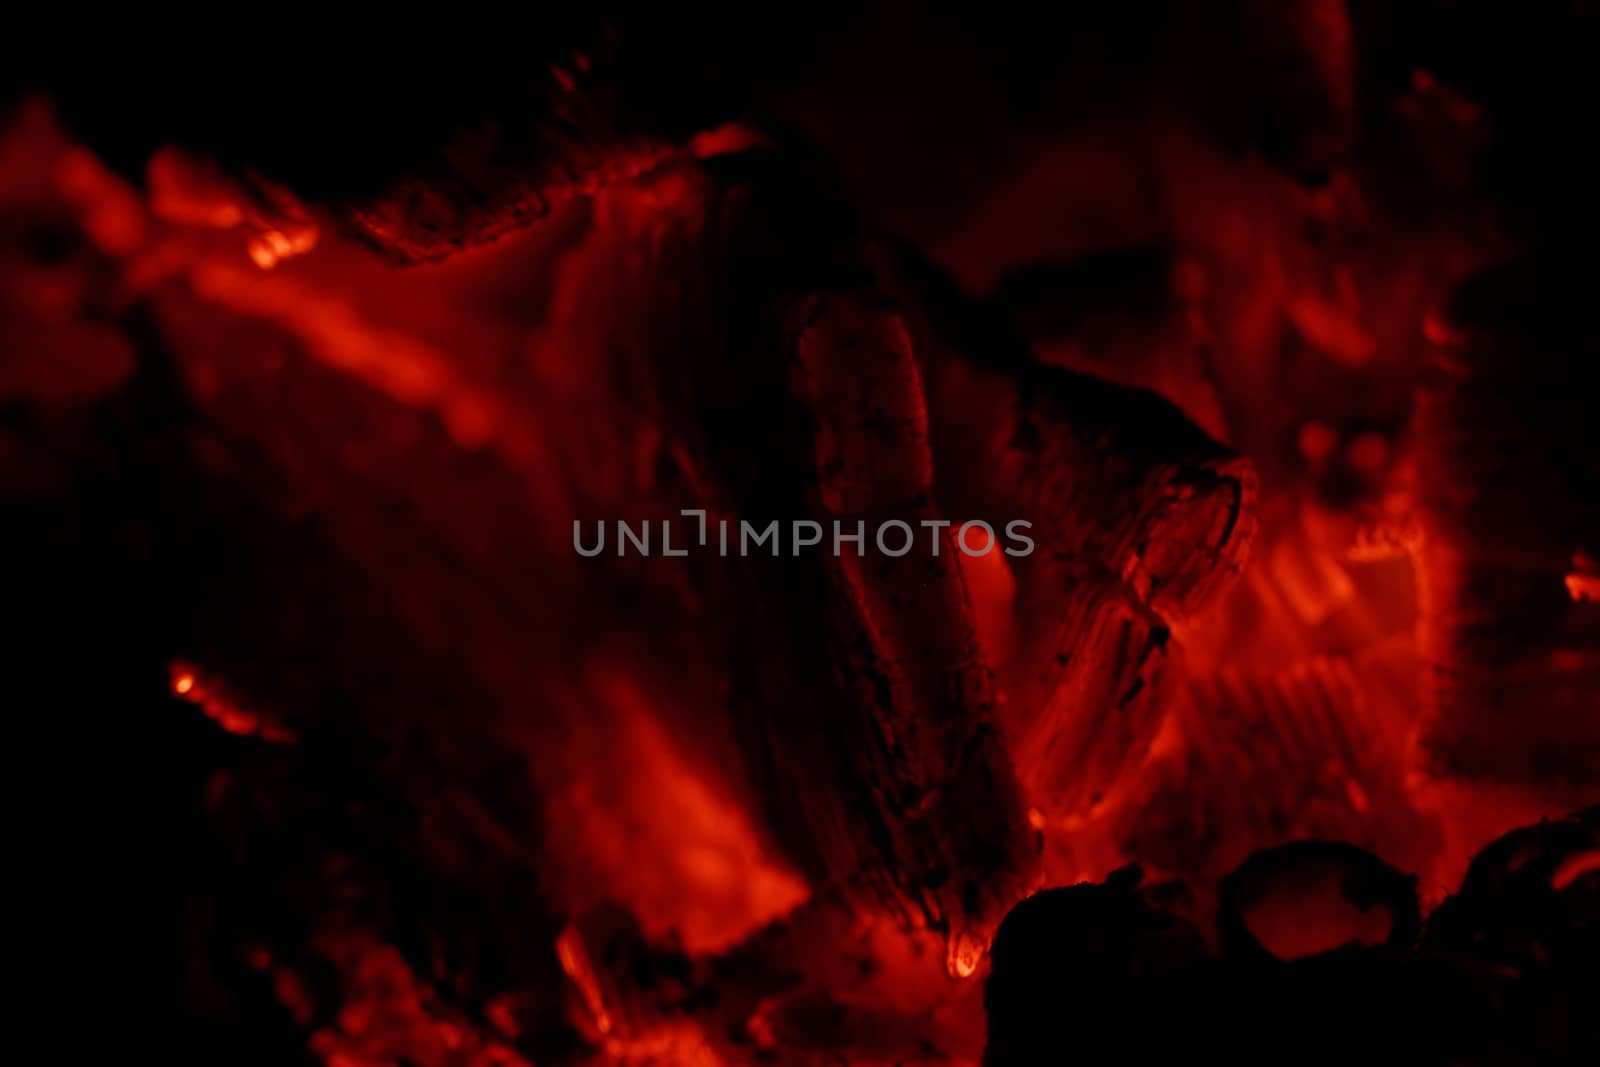 glowing embers in hot red color